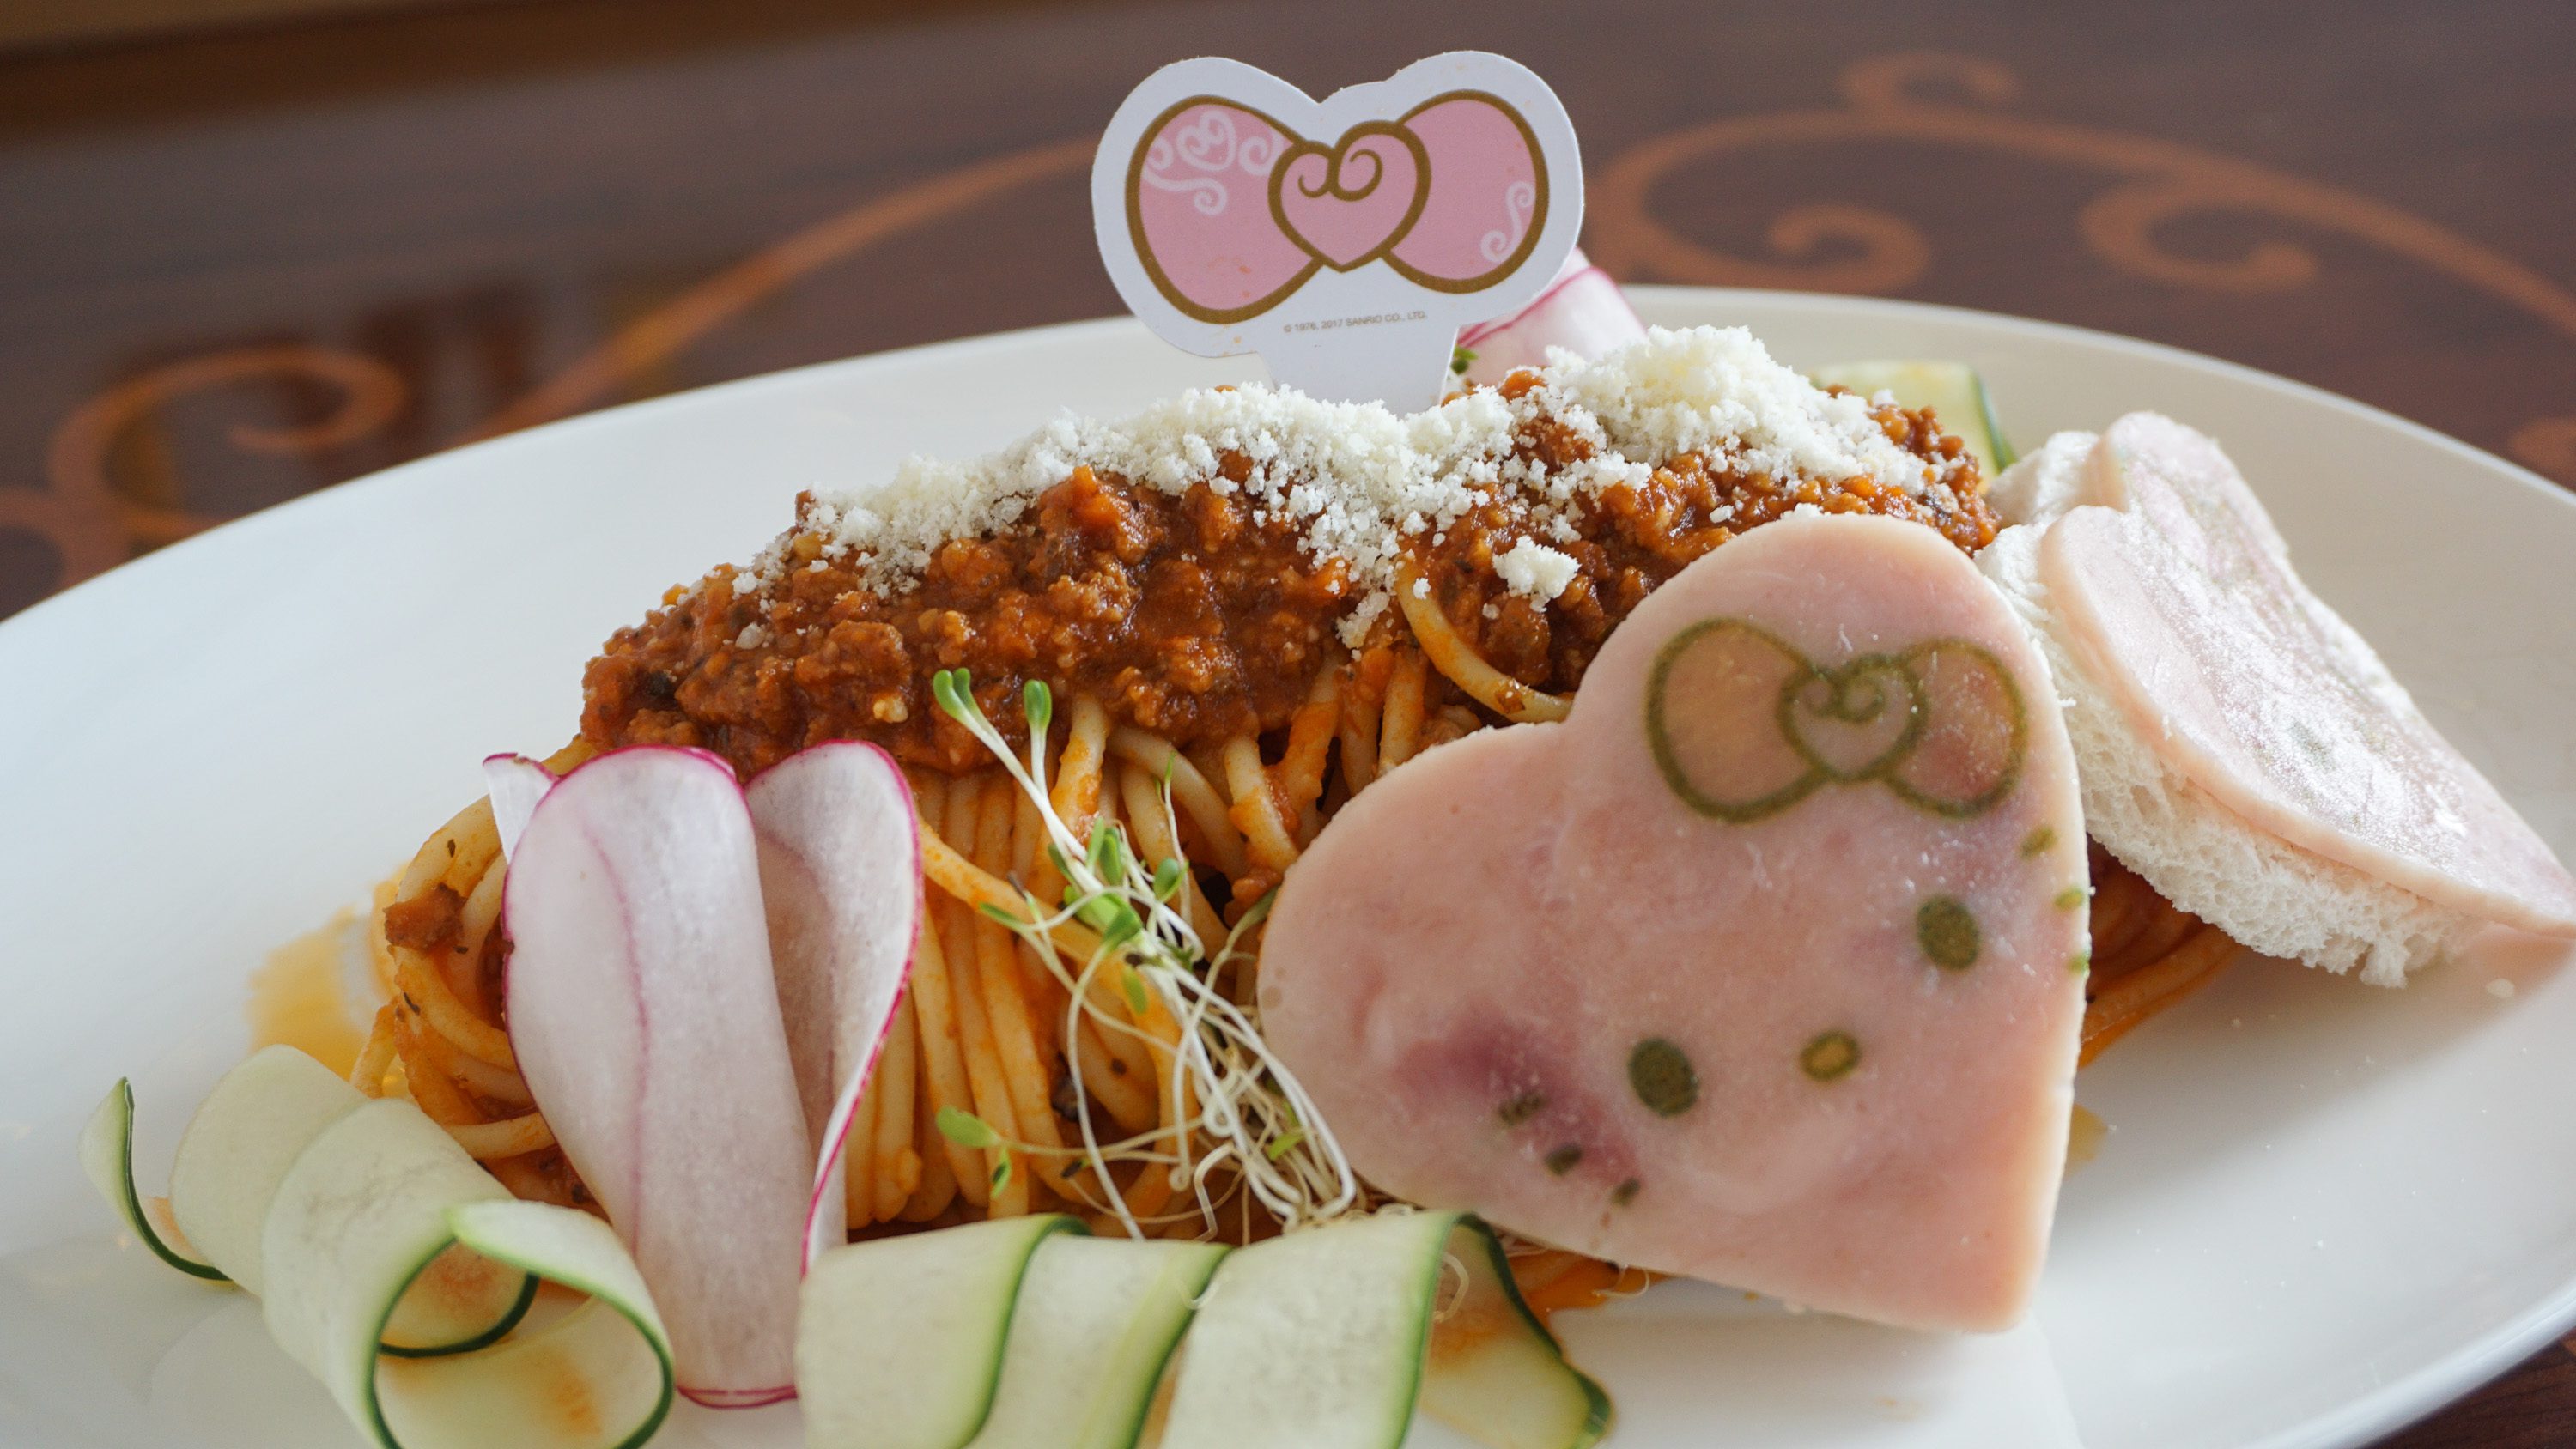 SPAGHETTI BOLOGNESE. The classic pasta dish is served with a side of Sanrio by way of Kitty-printed ham. Photo by Vernise Tantuco/ Rappler 